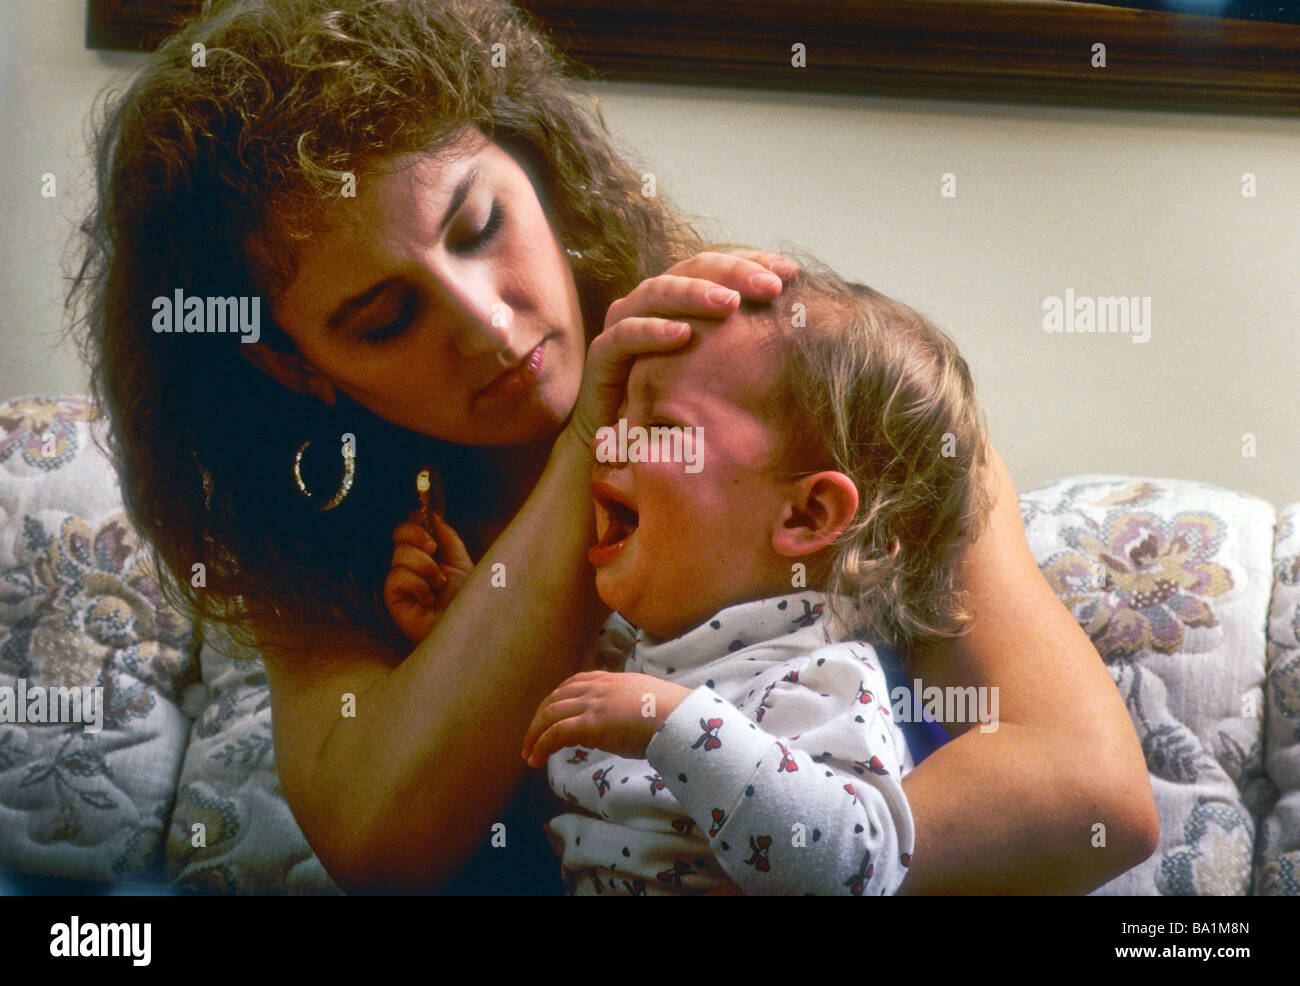 Mother Comfort Baby Child Girl Daughter Fever Sick Ill Cry Pain Hurt Care Concern Love Worry Temp Health Helpless Stock Photo Alamy